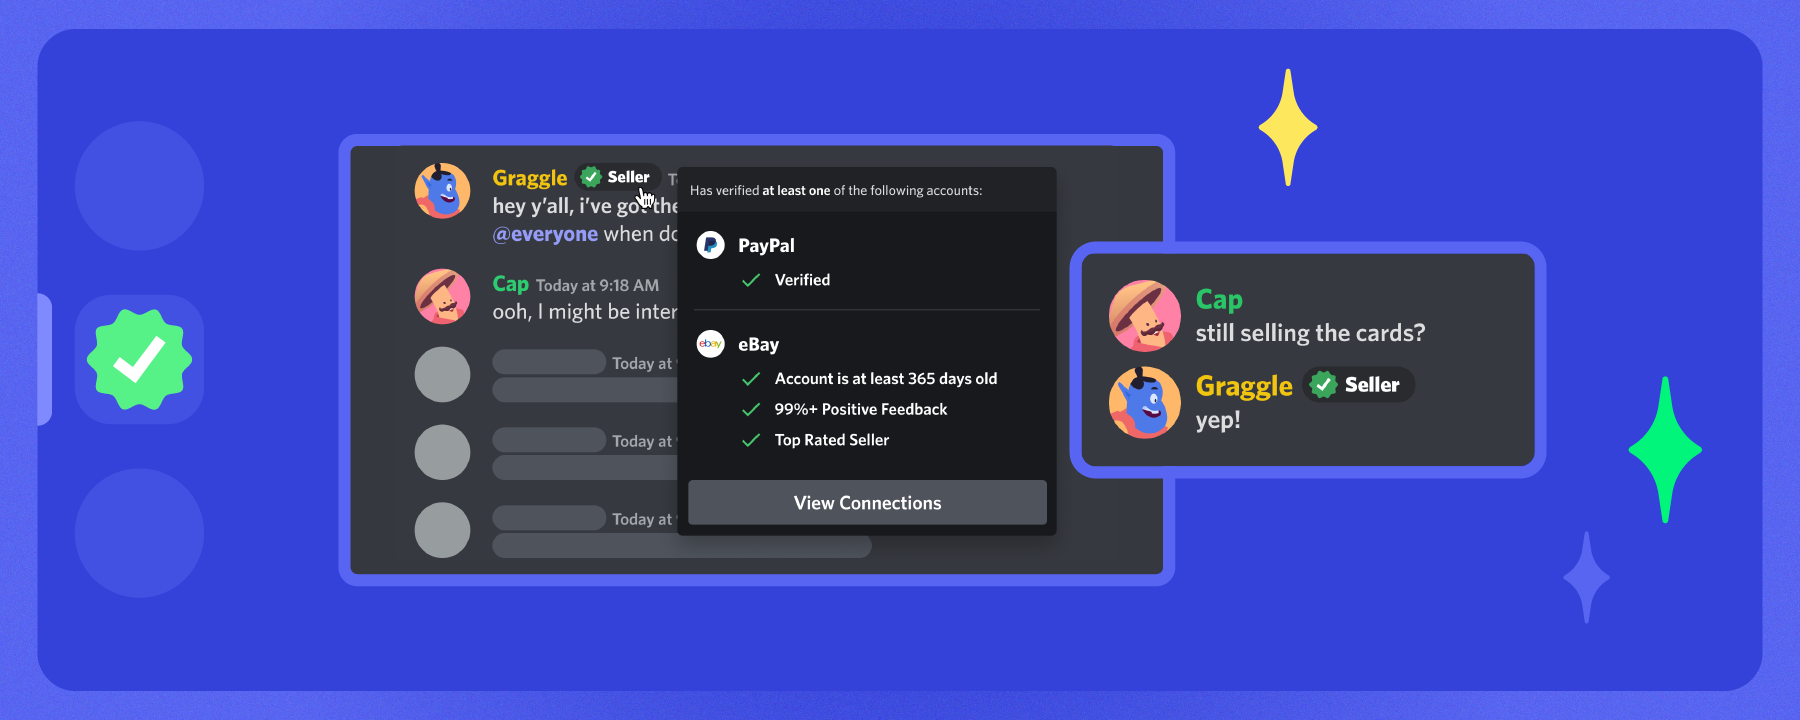 Connect with others who share your interests and use similar applications
Discover new applications that can enhance your Discord usage